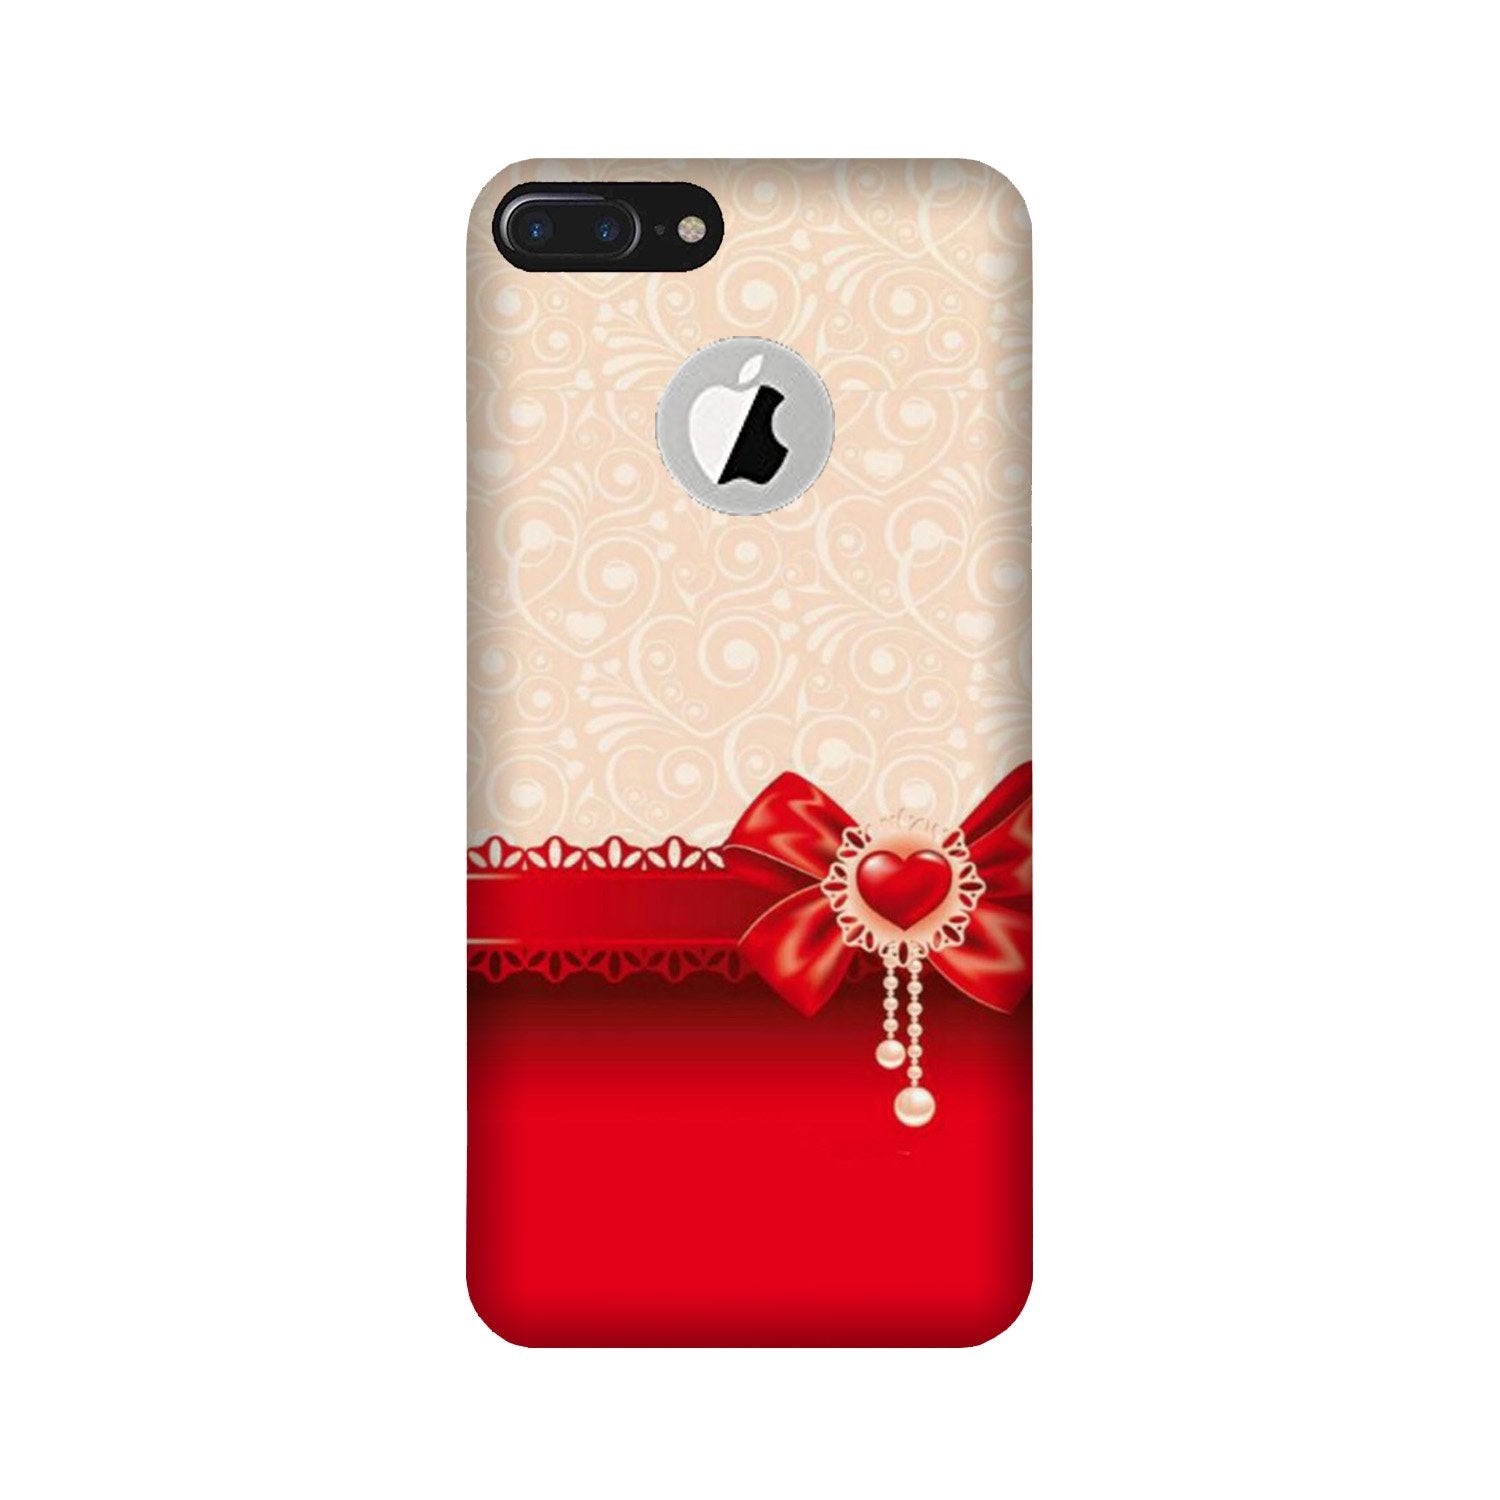 Gift Wrap3 Case for iPhone 7 Plus logo cut